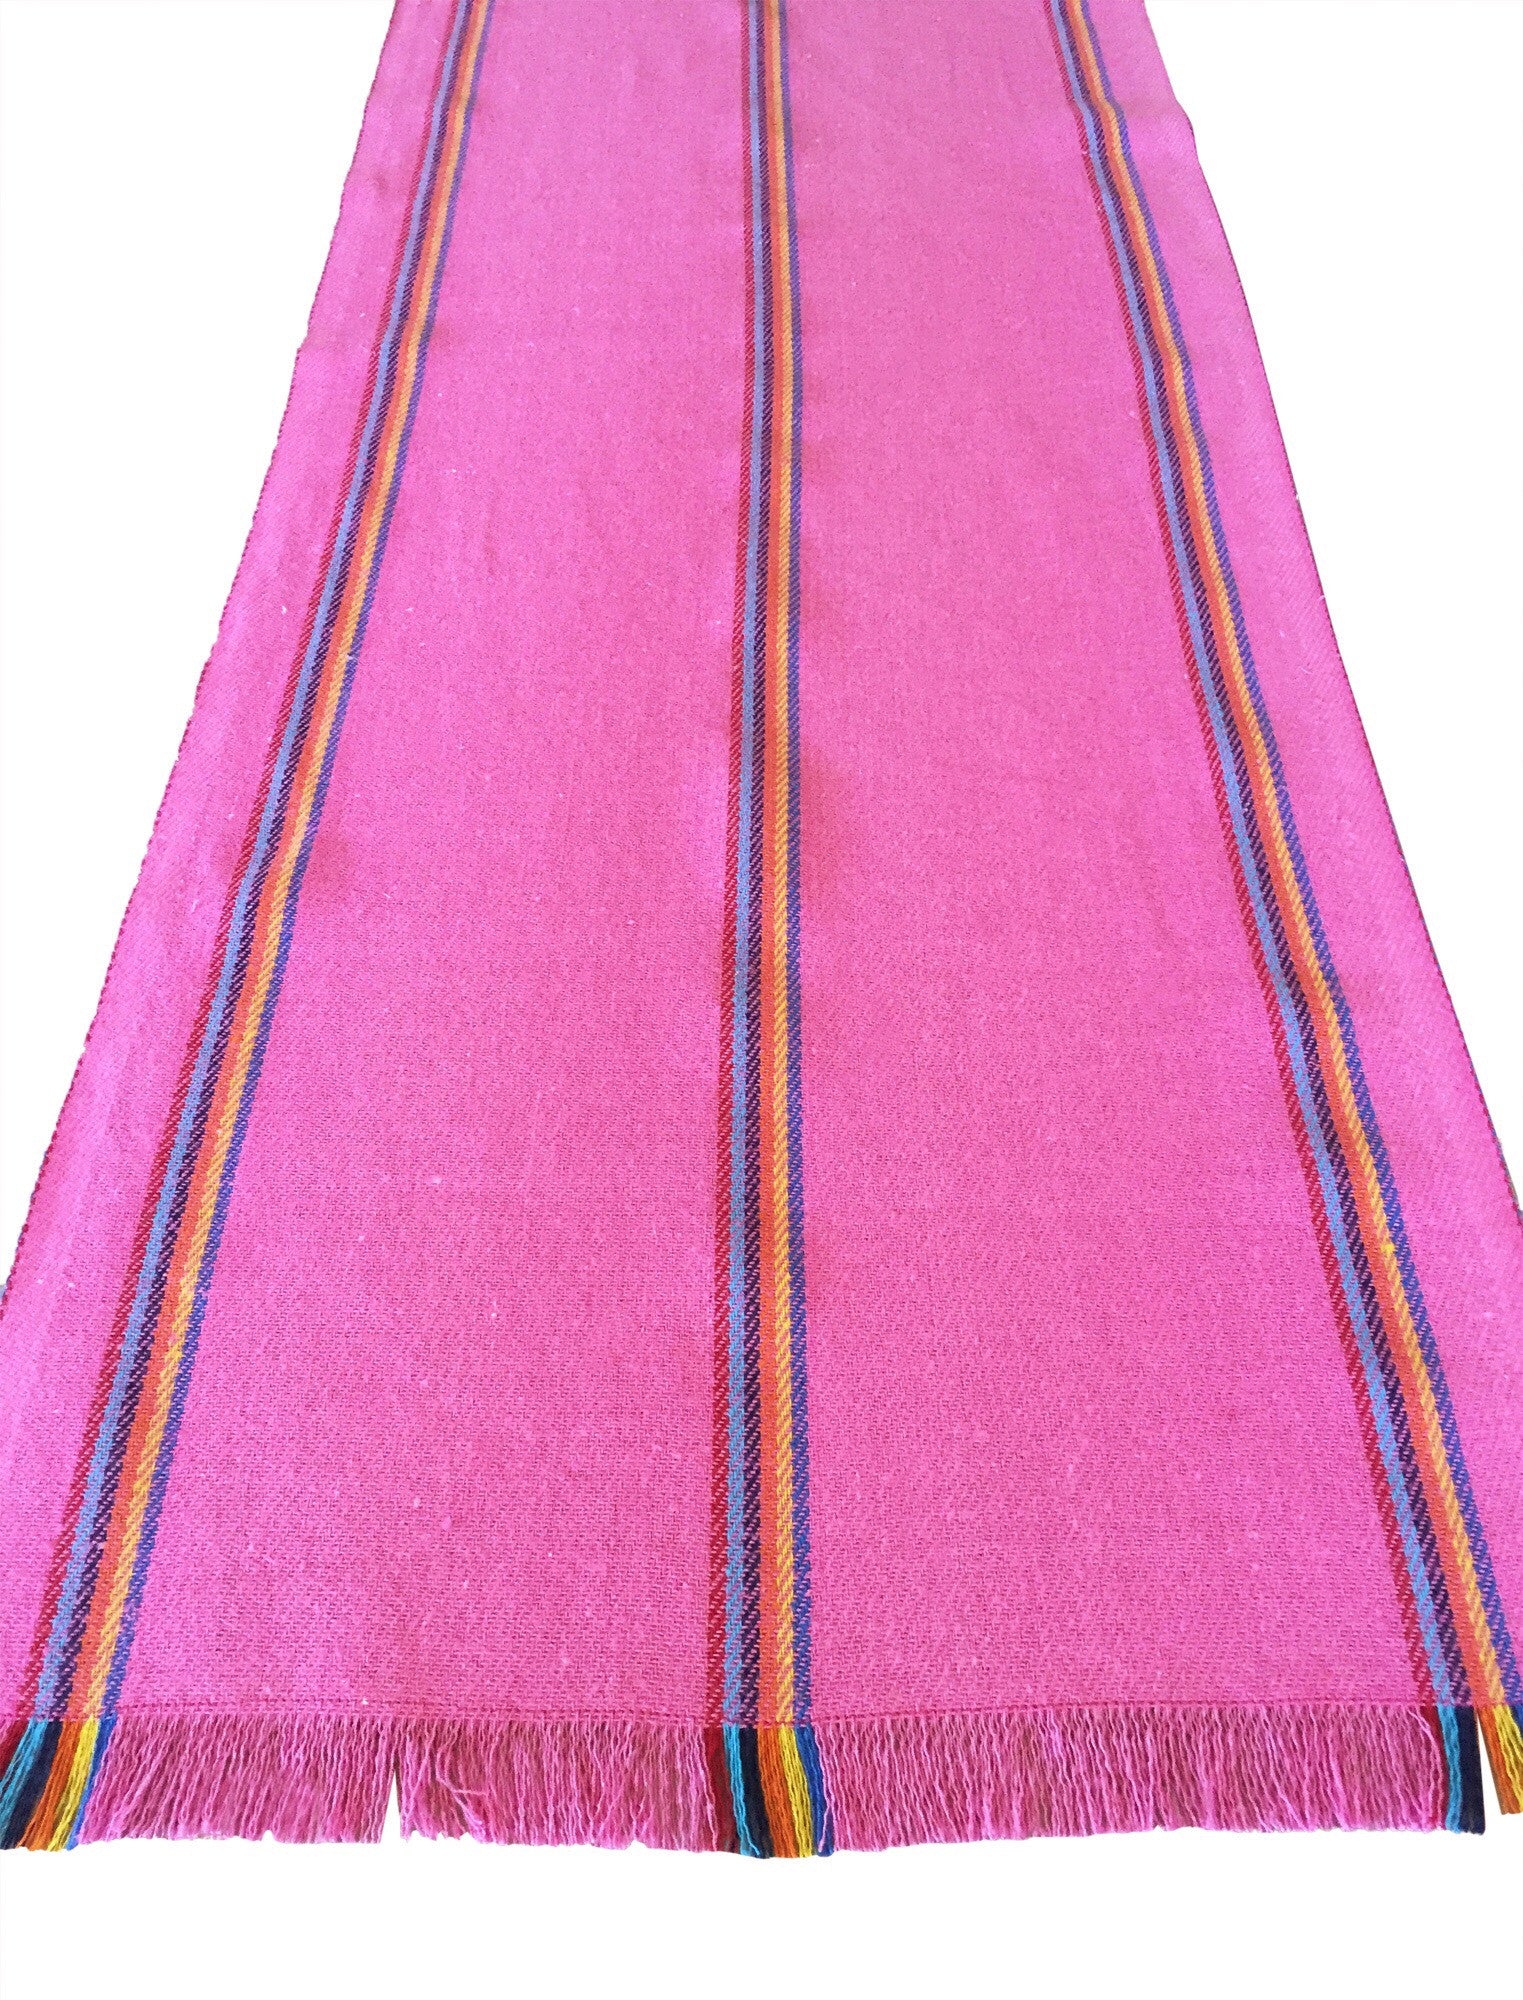 Mexican pink jerga table runner - MesaChic - 1